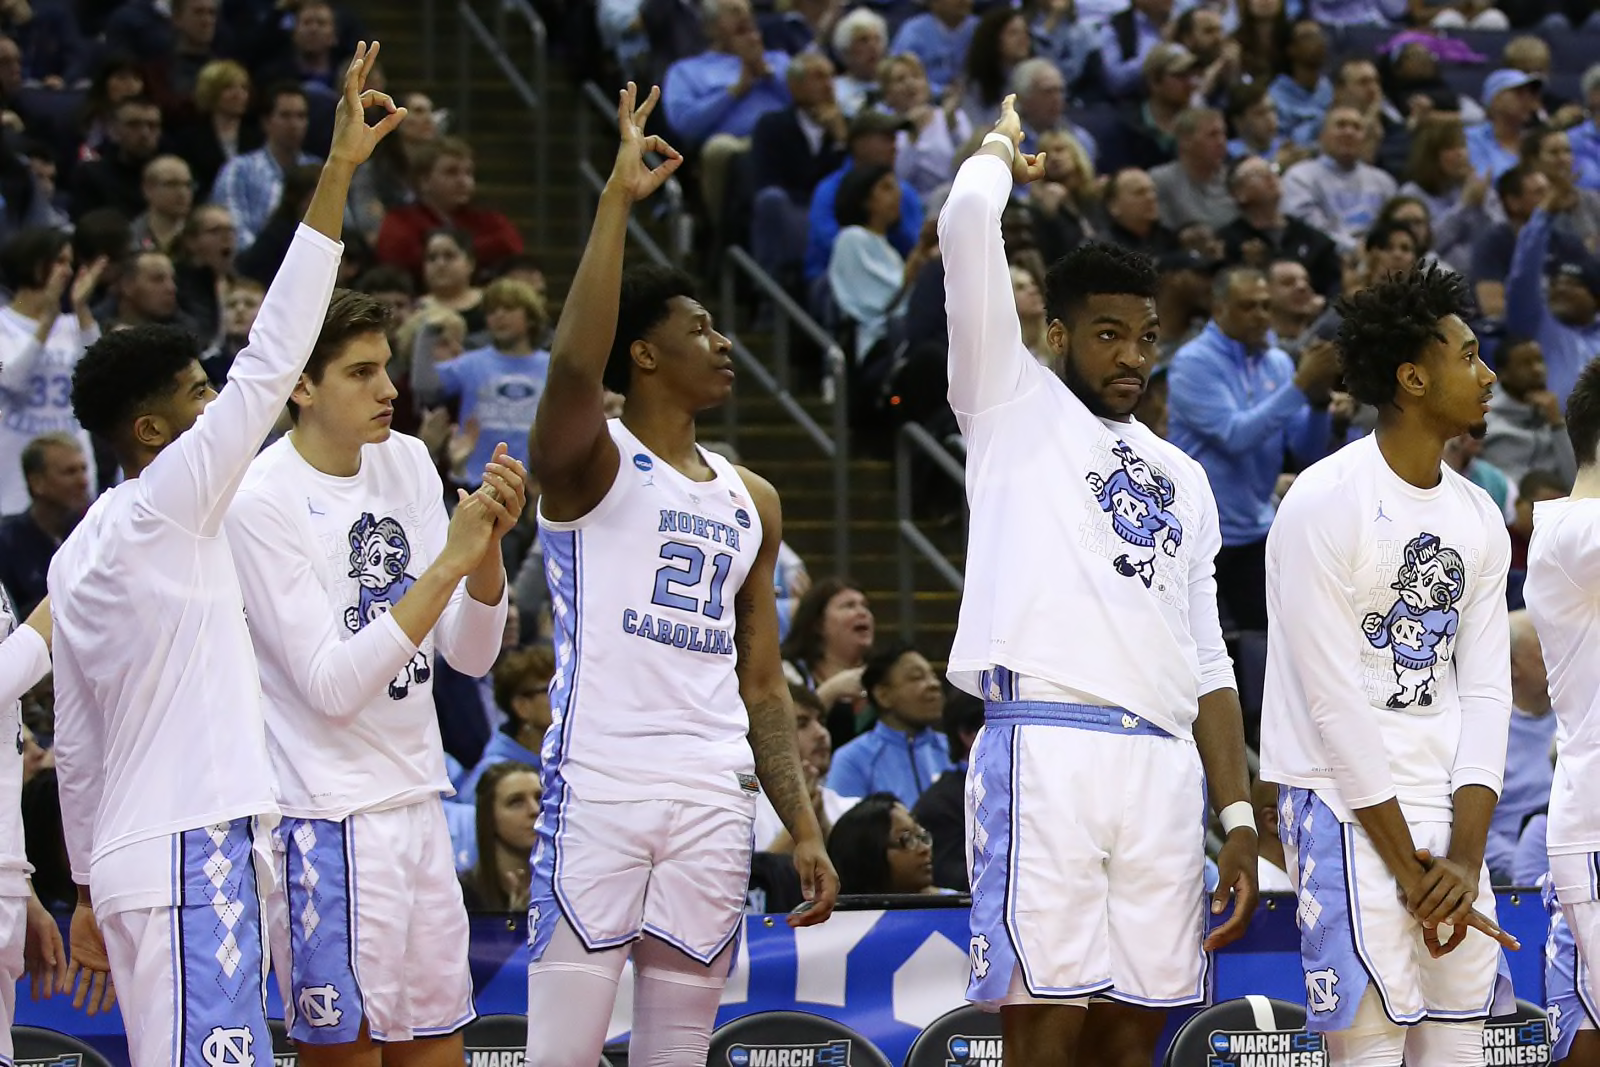 UNC Basketball: Lineup options for Tar Heels in 2019-20